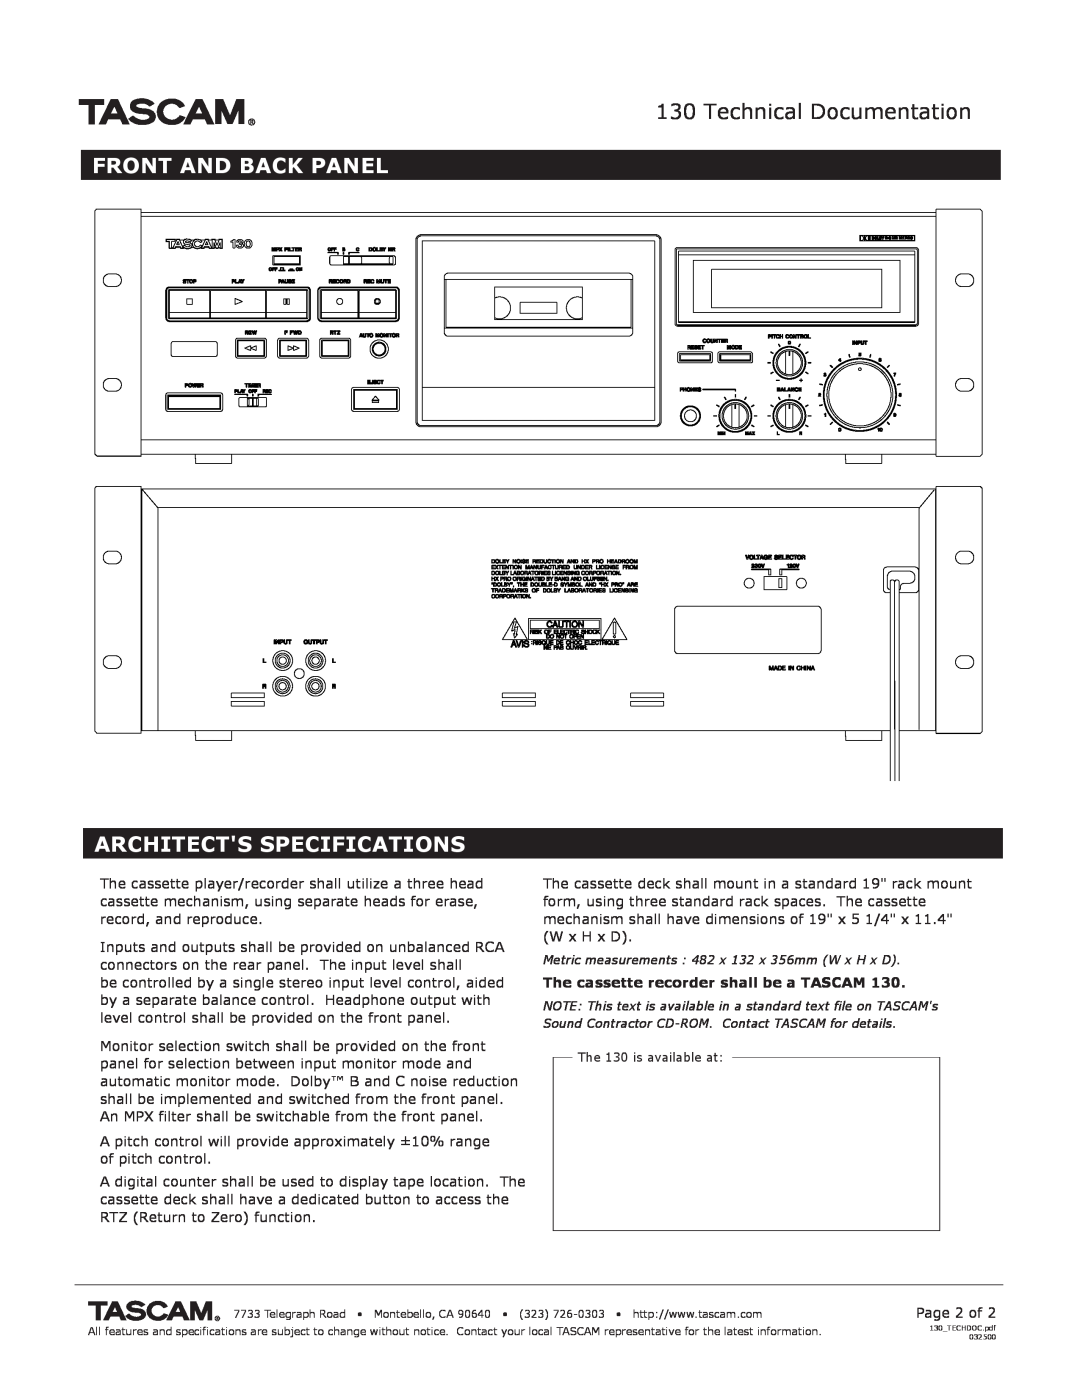 Tascam 130 specifications Technical Documentation, Front And Back Panel Architects Specifications 